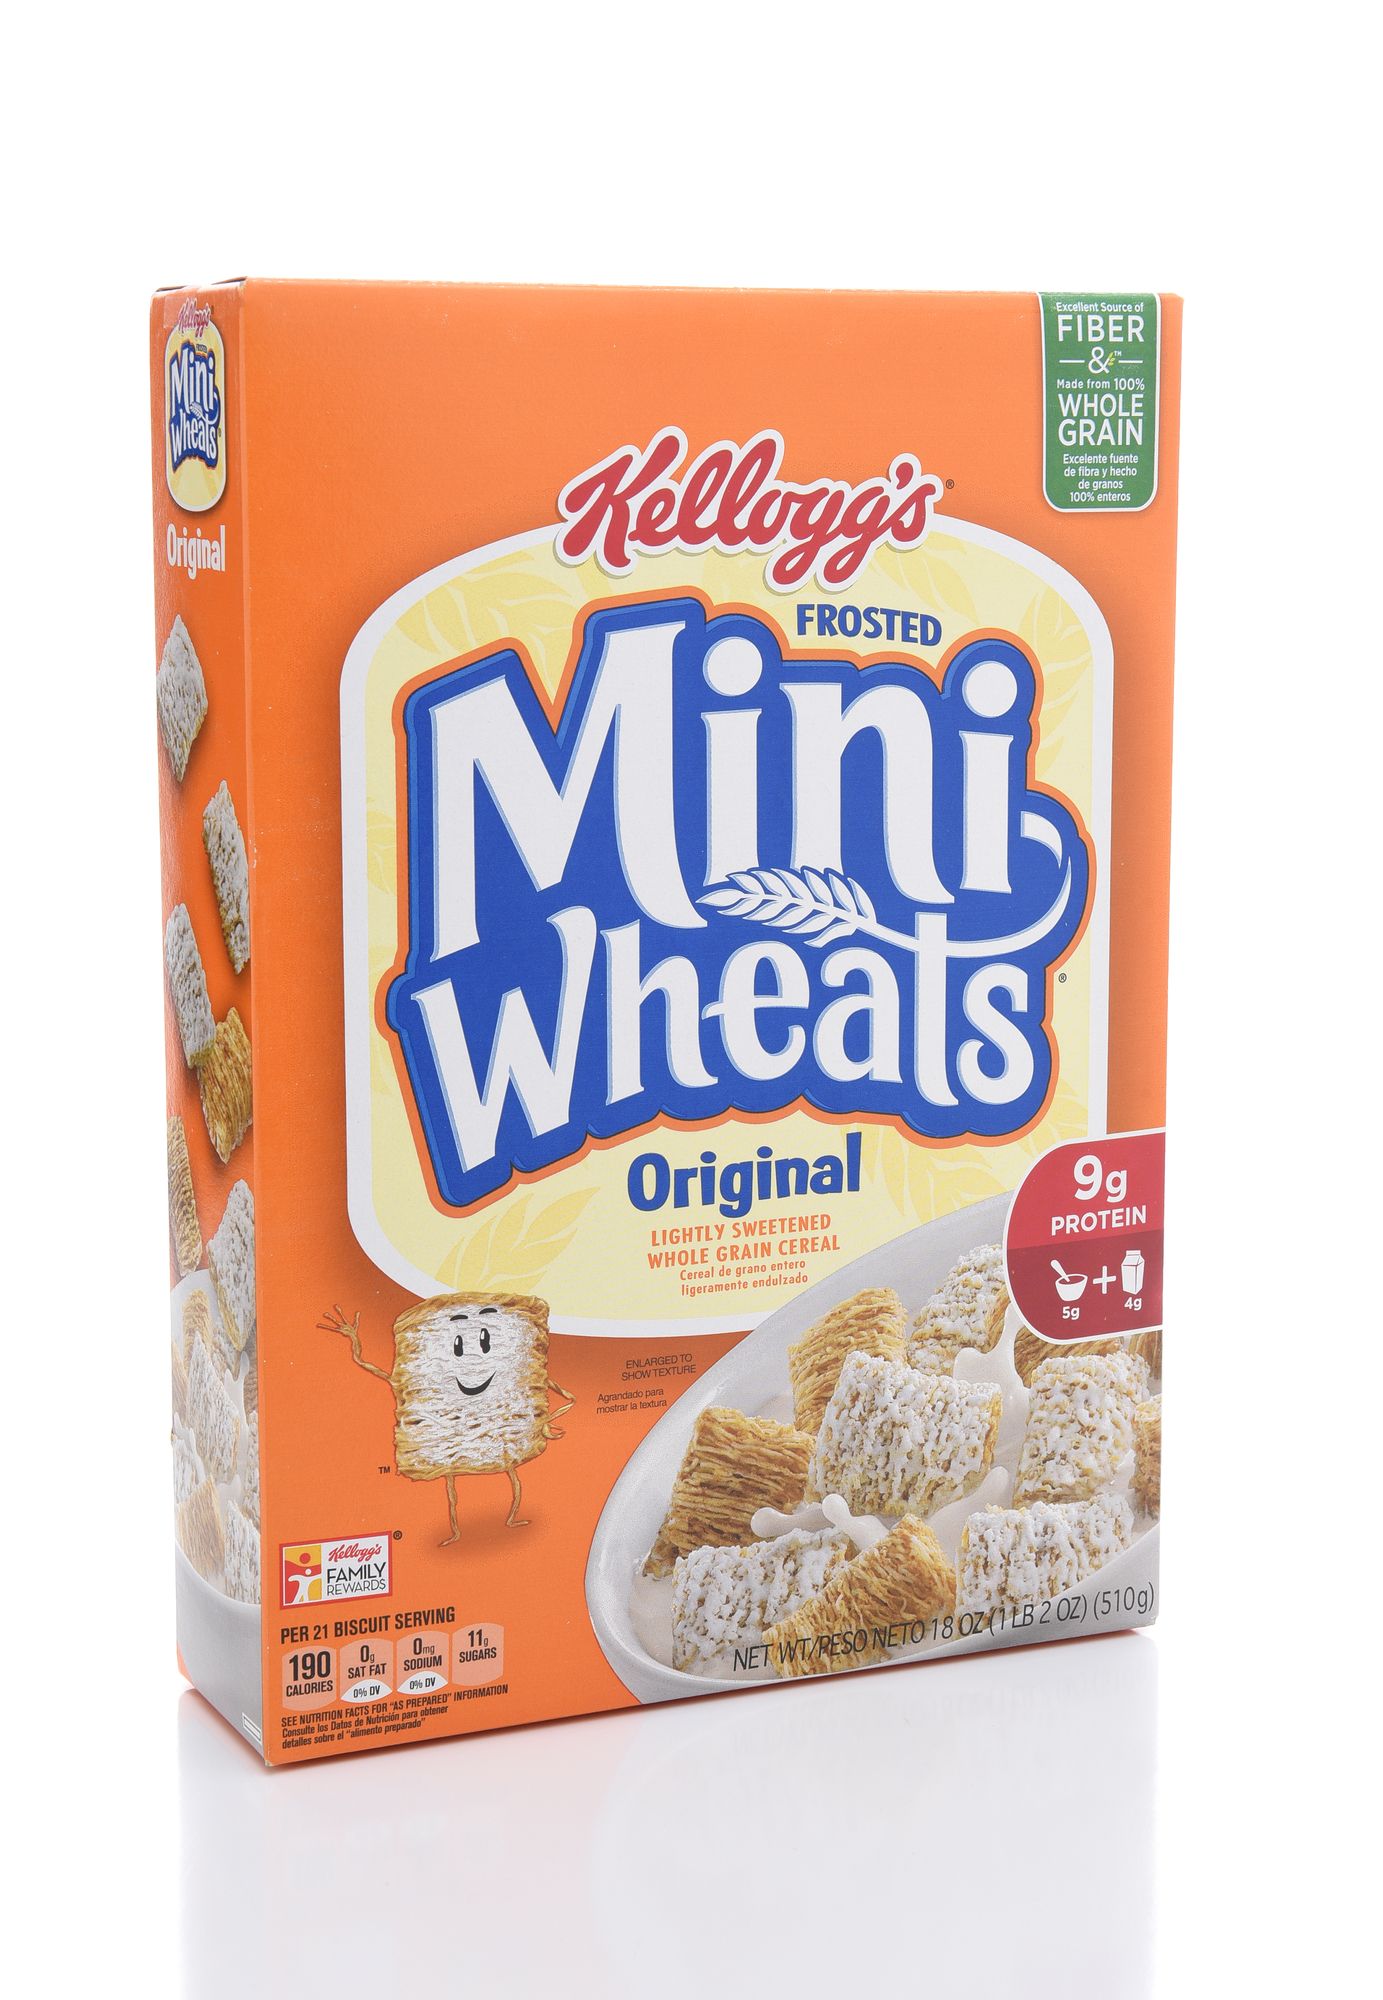 box of Kellogg's frosted mini wheats cereal - kellogg's ceral